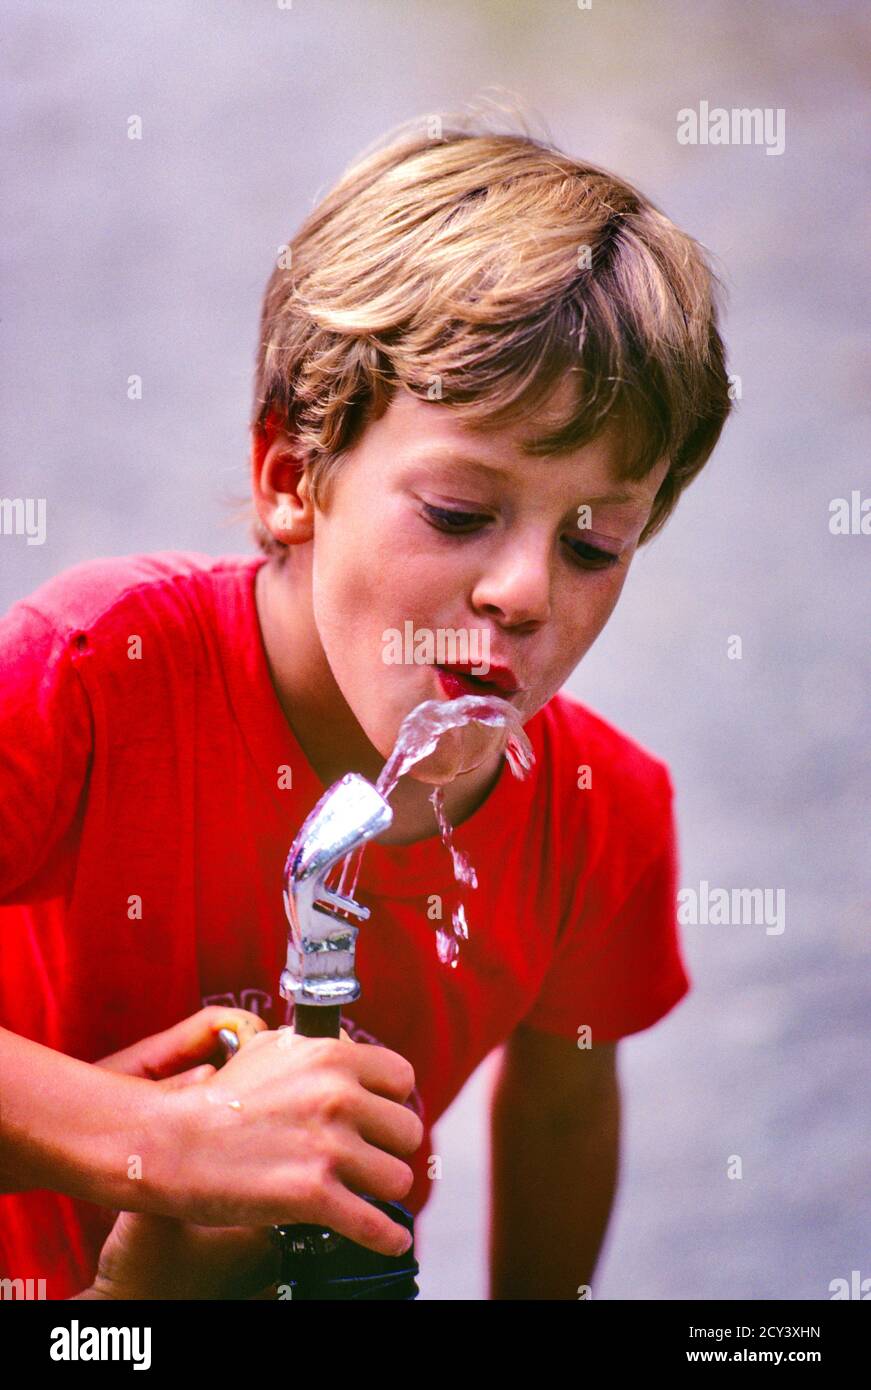 1970s THIRSTY BLOND PRETEEN BOY WEARING RED T-SHIRT REHYDRATING DRINKING COOL CLEAN SAFE REFRESHING WATER FROM OUTDOOR FOUNTAIN - cj00884 CAM001 HARS BLOND COOL SECURITY SAFETY PLEASED JOY LIFESTYLE HEALTHINESS COPY SPACE HALF-LENGTH MALES RISK EXPRESSIONS HAPPINESS WELLNESS CHEERFUL PROTECTION EXTERIOR RECREATION CAM001 PRETEEN SMILES CONCEPTUAL HYDRATION JOYFUL T-SHIRT JUVENILES PRE-TEEN PRE-TEEN BOY REFRESHING RELAXATION THIRSTY CAUCASIAN ETHNICITY OLD FASHIONED Stock Photo